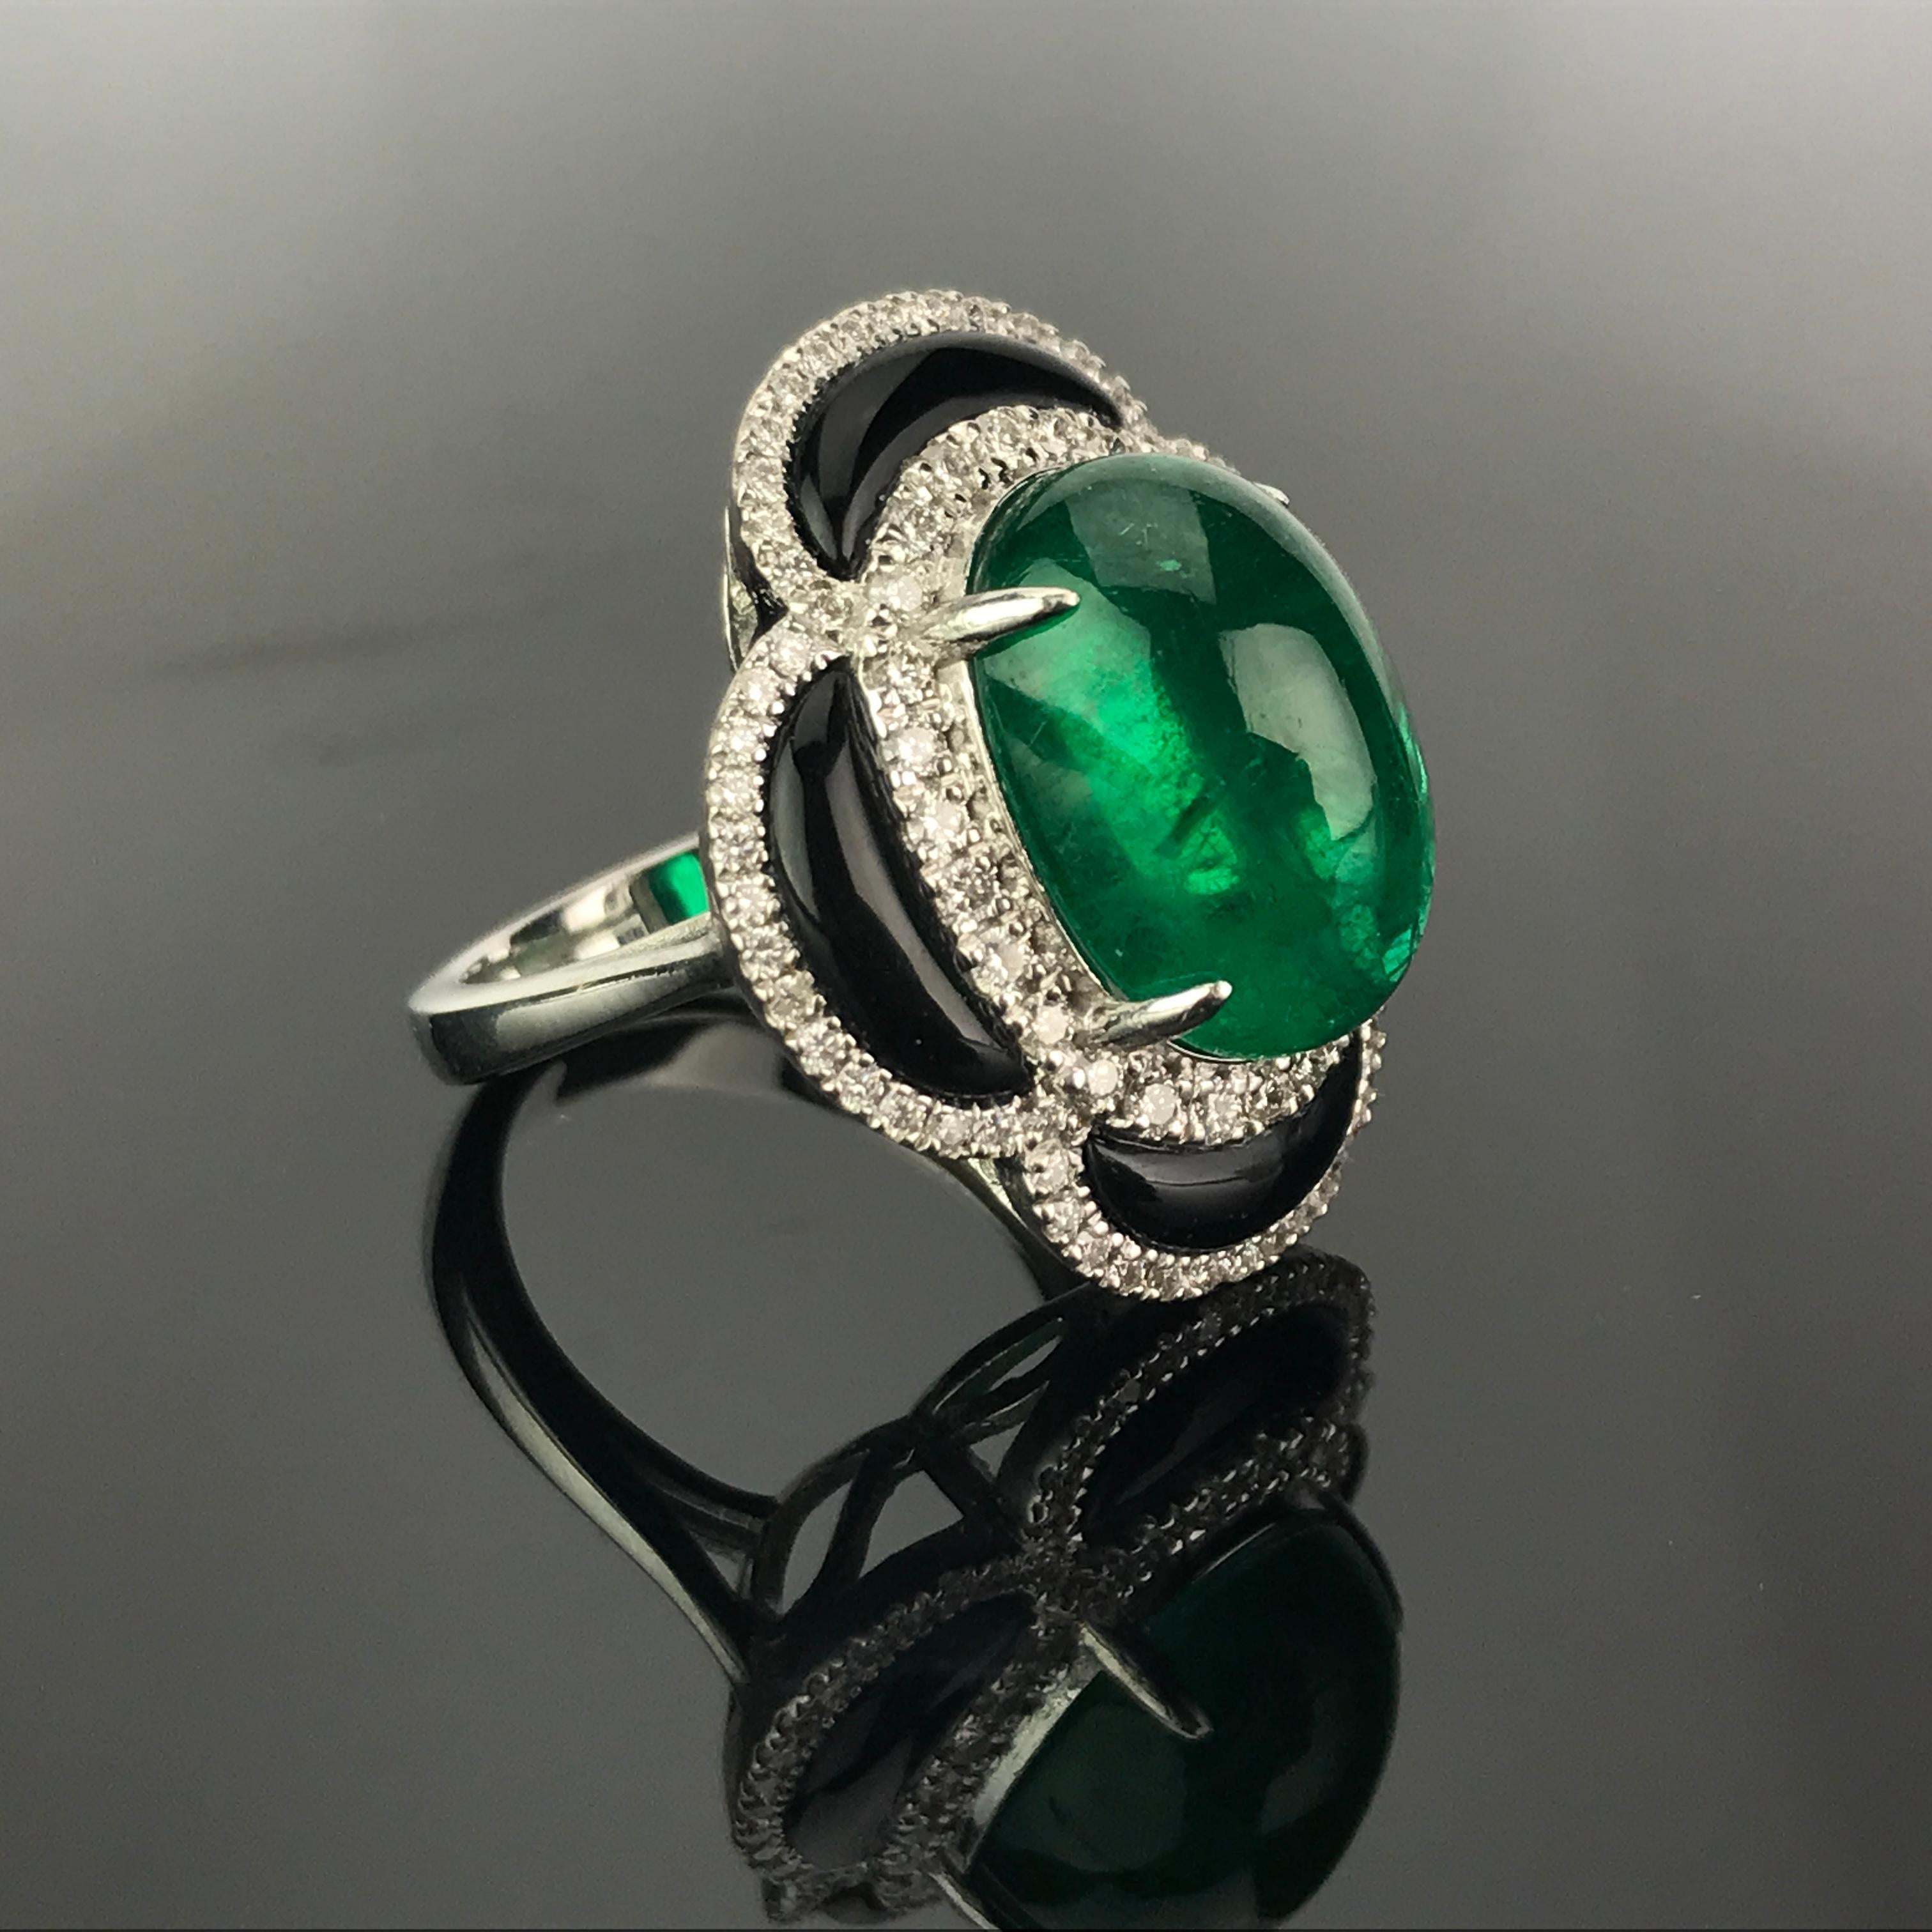 A stunning art-deco looking 9.40 carat lustrous Zambian Emerald cabochon with Black Onyx and Diamonds, set in 18K White Gold. Currently sized at US 6, can be resized without additional cost. Certificate can be provided upon request. 

Material